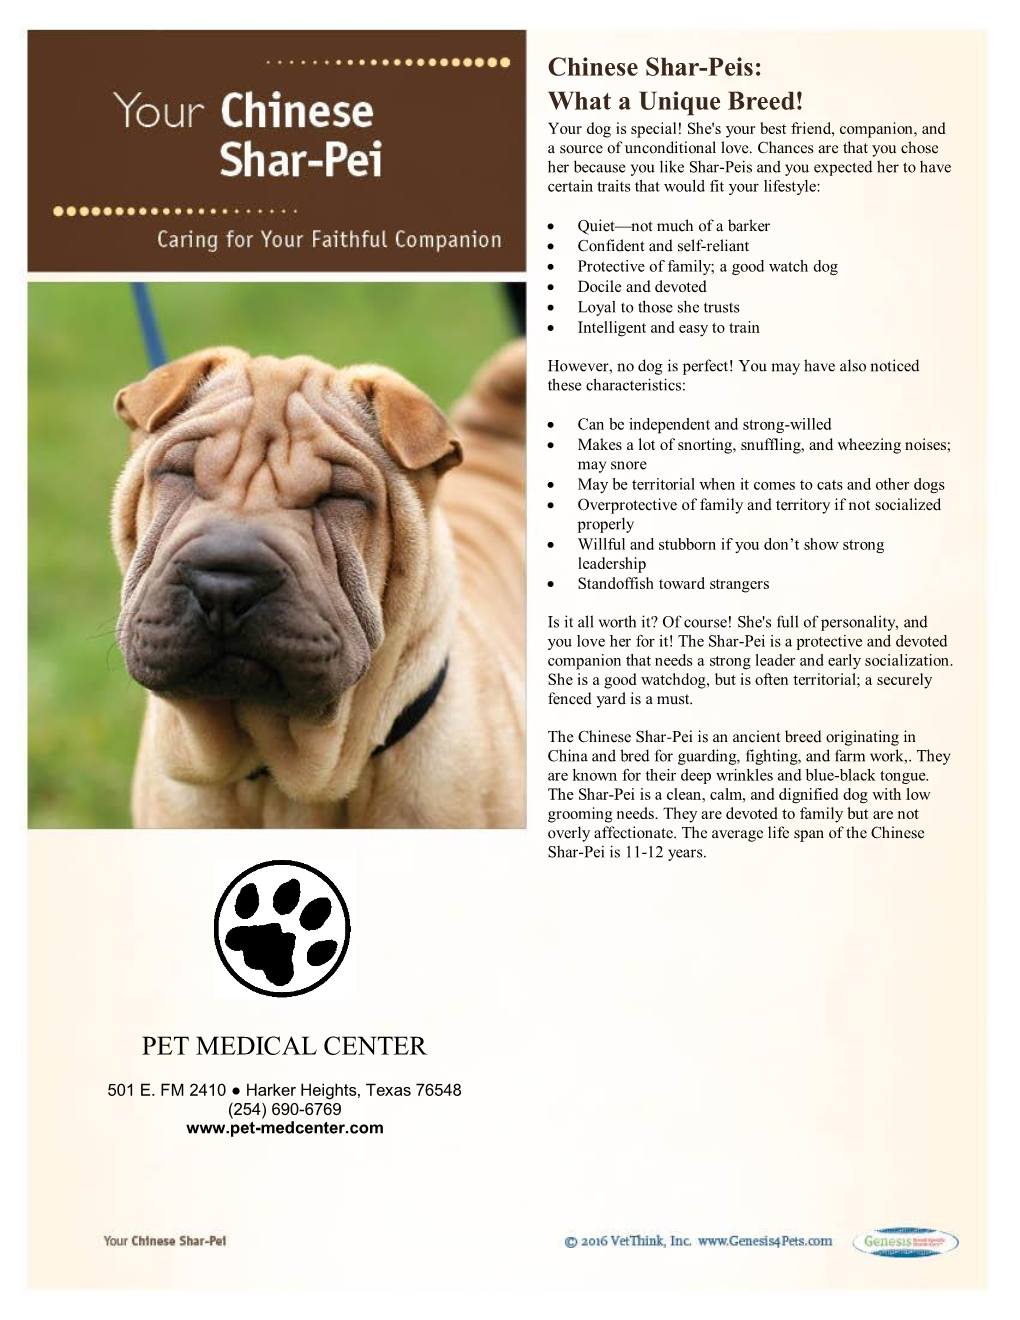 Chinese Shar-Peis: What a Unique Breed! PET MEDICAL CENTER